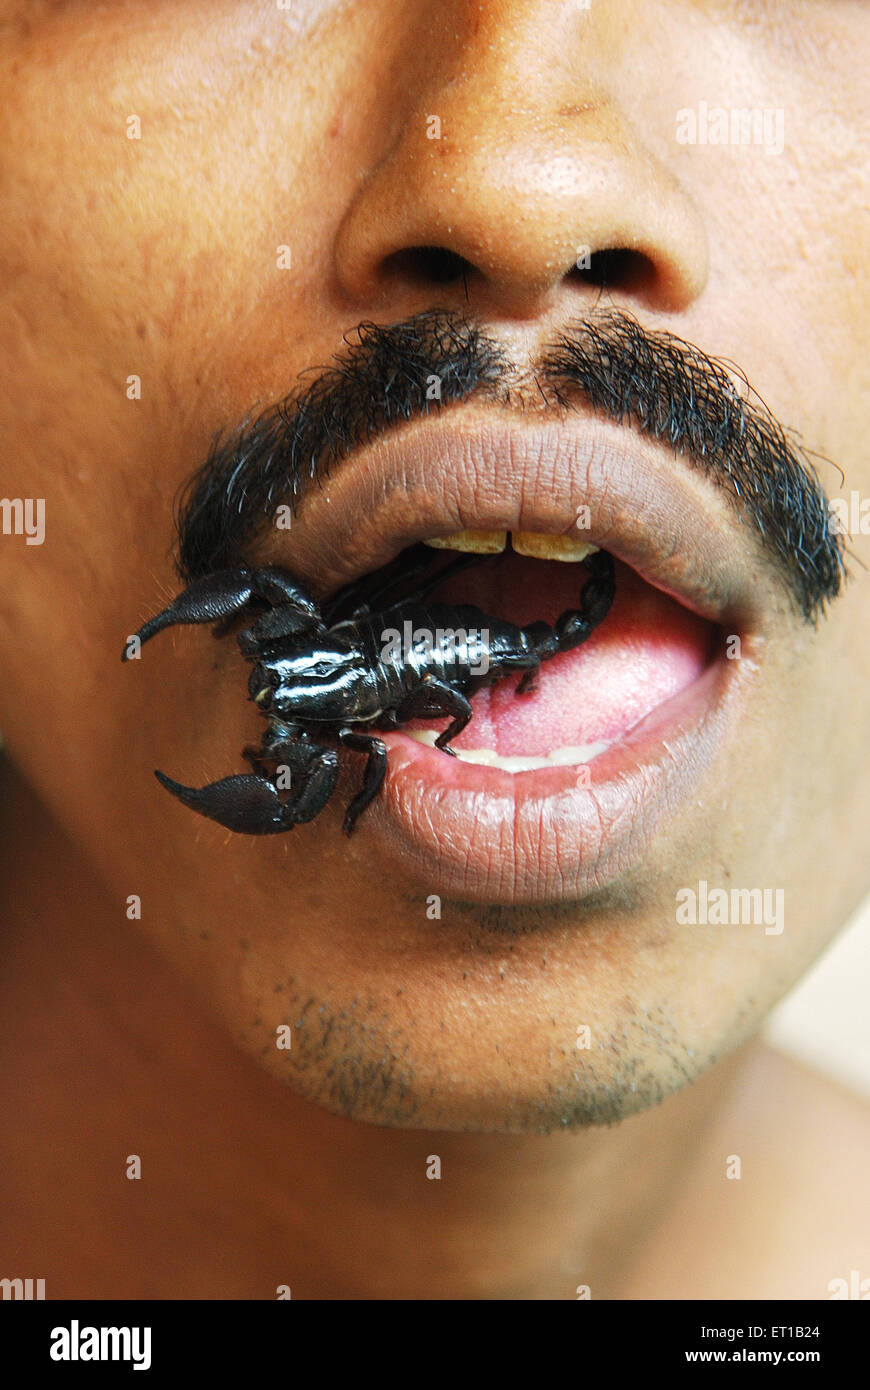 Fun with scorpion on mouth Stock Photo